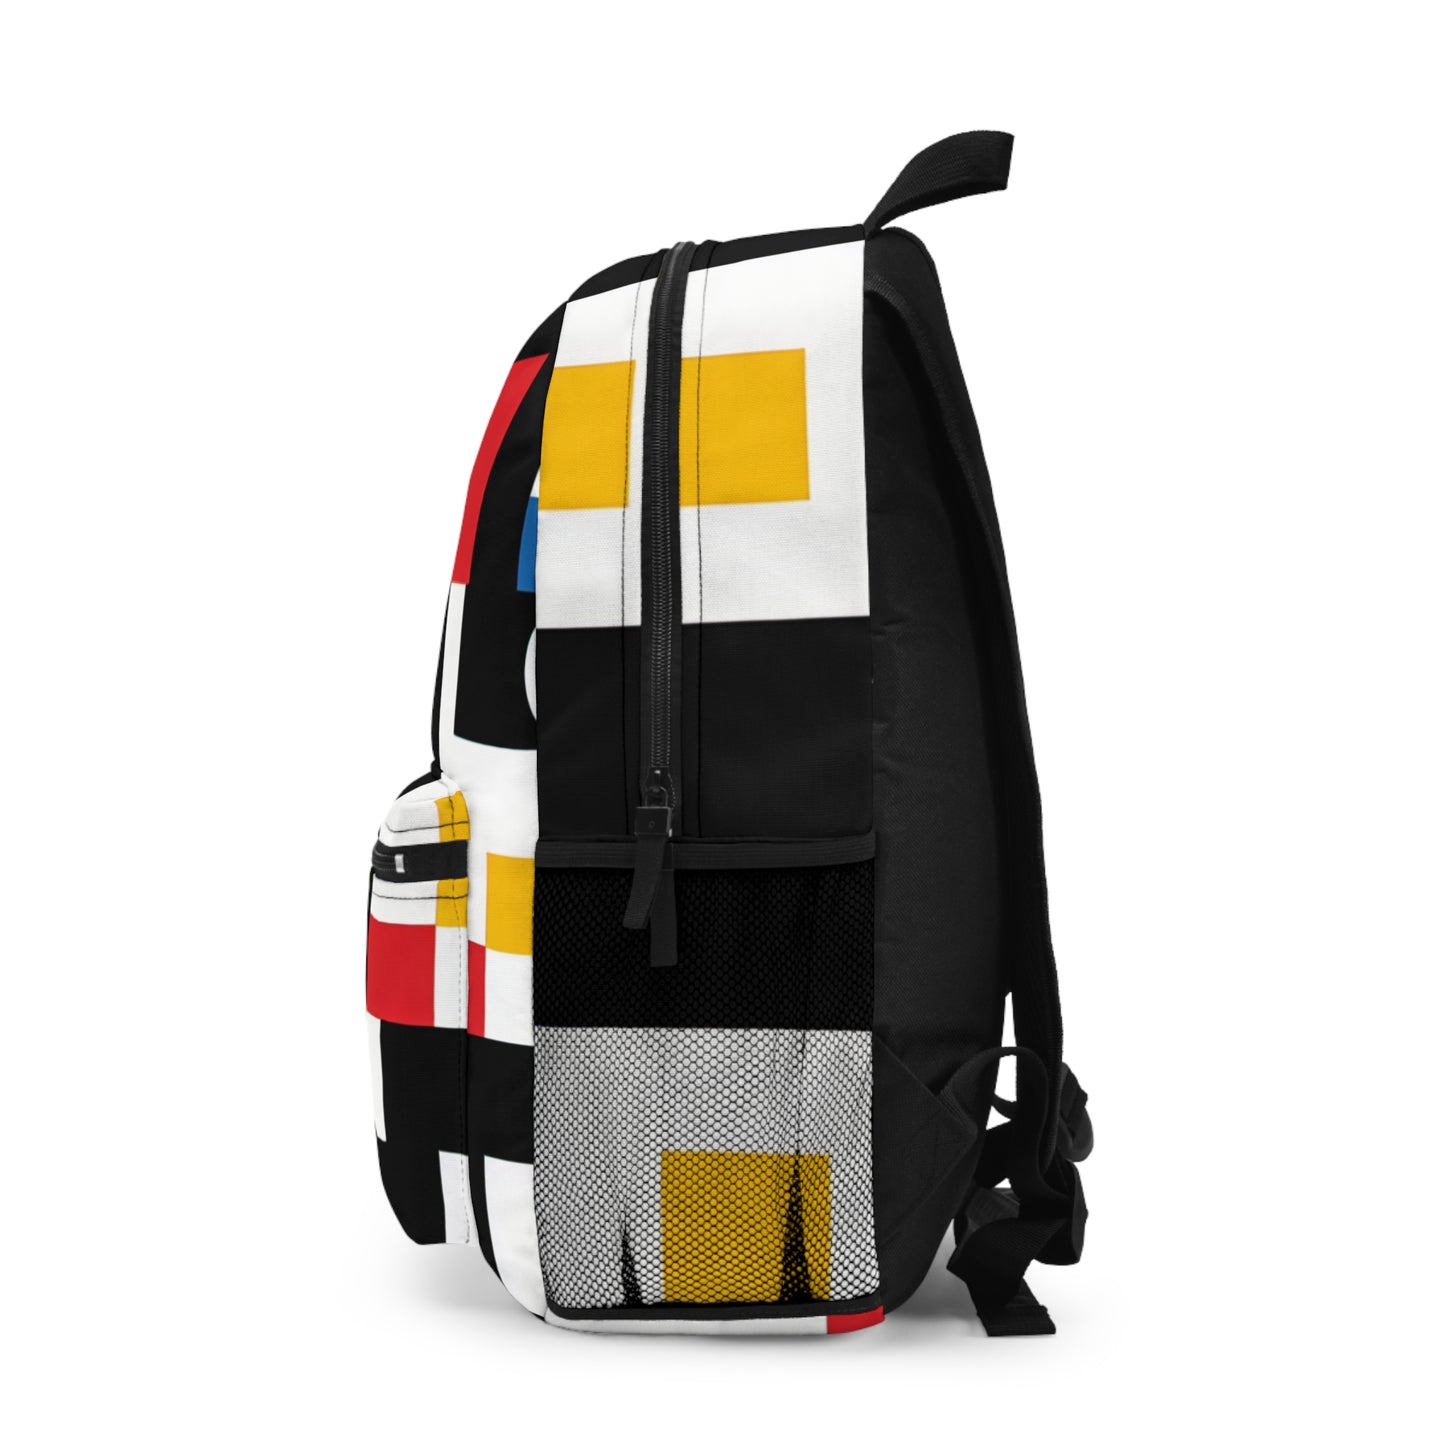 "Suprematic Harmony: Exploring Geometric Composition with Bold Colors" - The Alien Backpack Suprematism